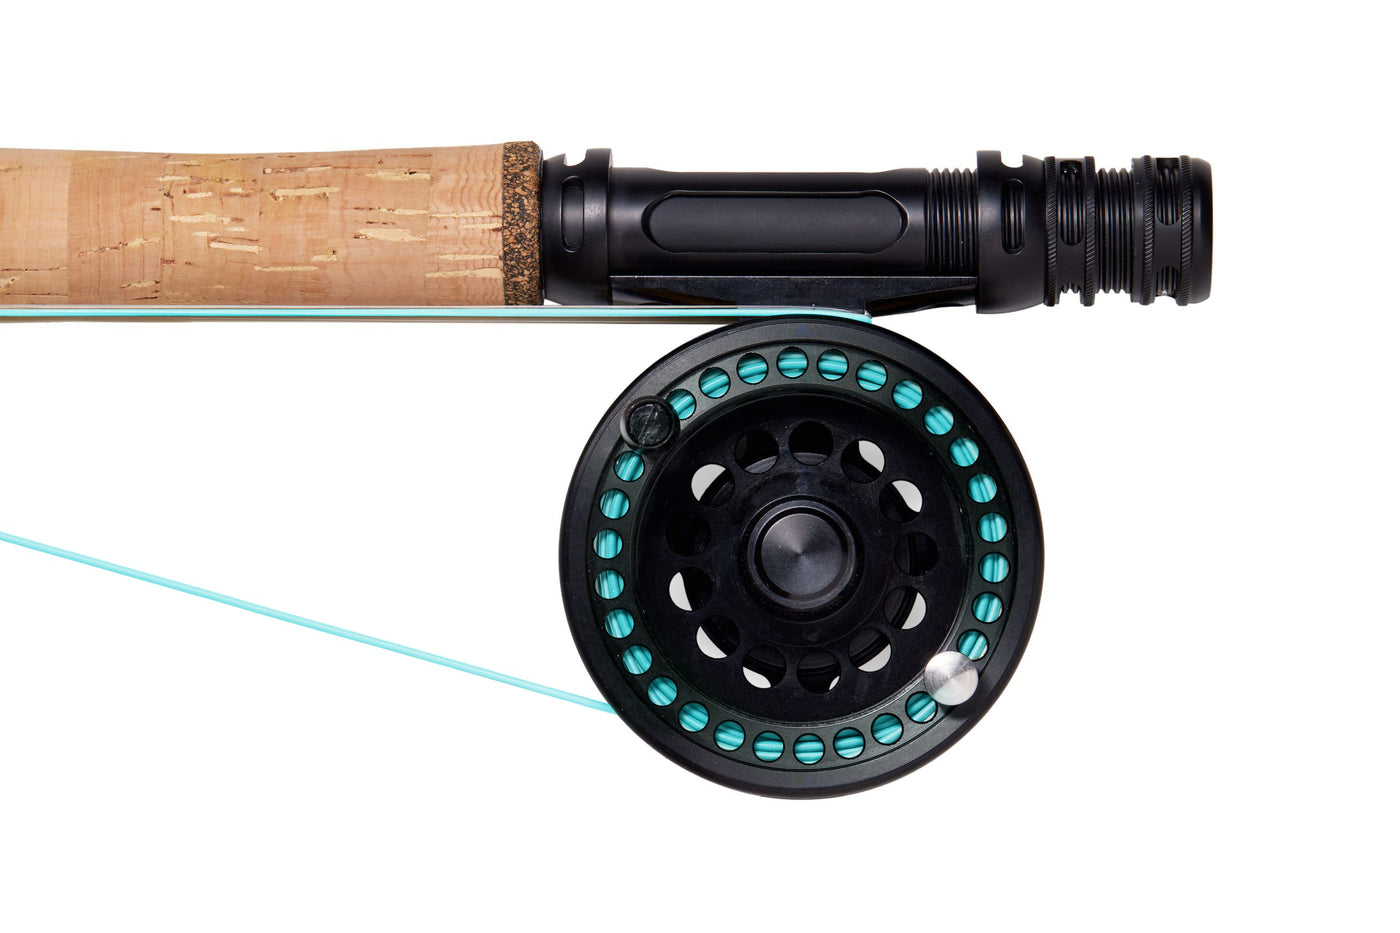 REYR GEAR First CAST Fly Rod, Telescoping Travel Fly Rod and India